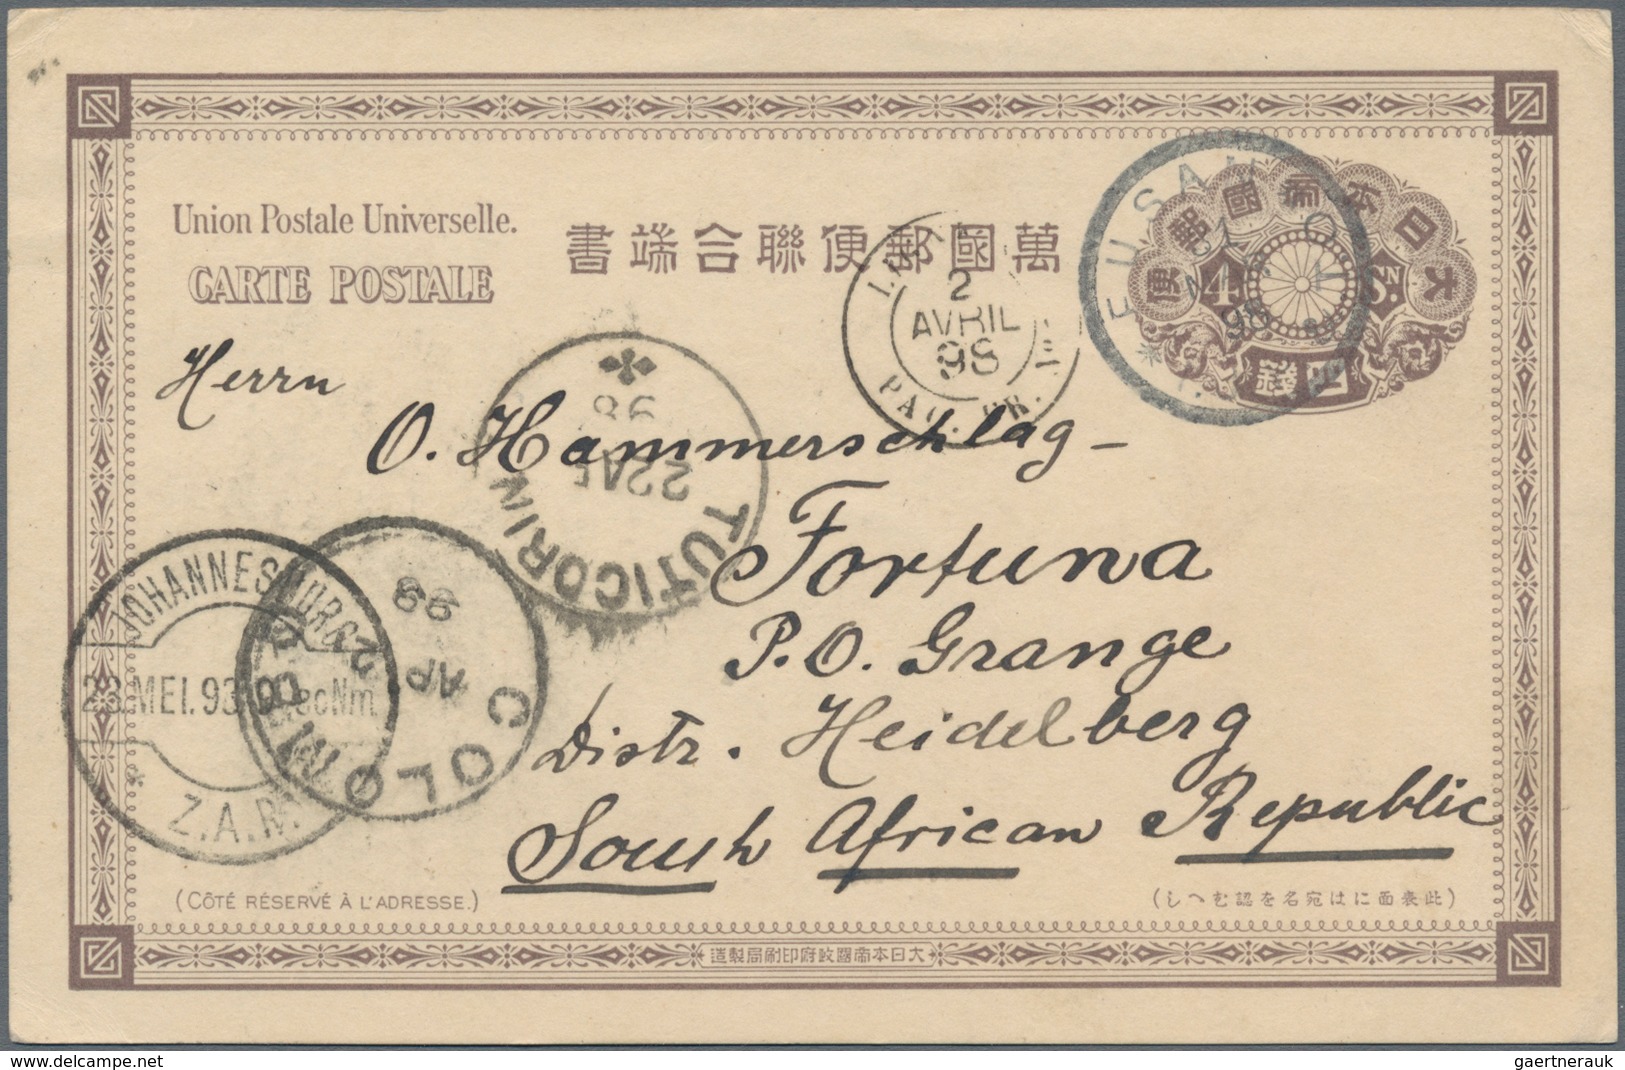 Japanische Post In Korea: 1898, UPU Card 4 S. Canc. "FUSAN I.J.P.& T.O. 1 APR 98" Via French Mail St - Military Service Stamps